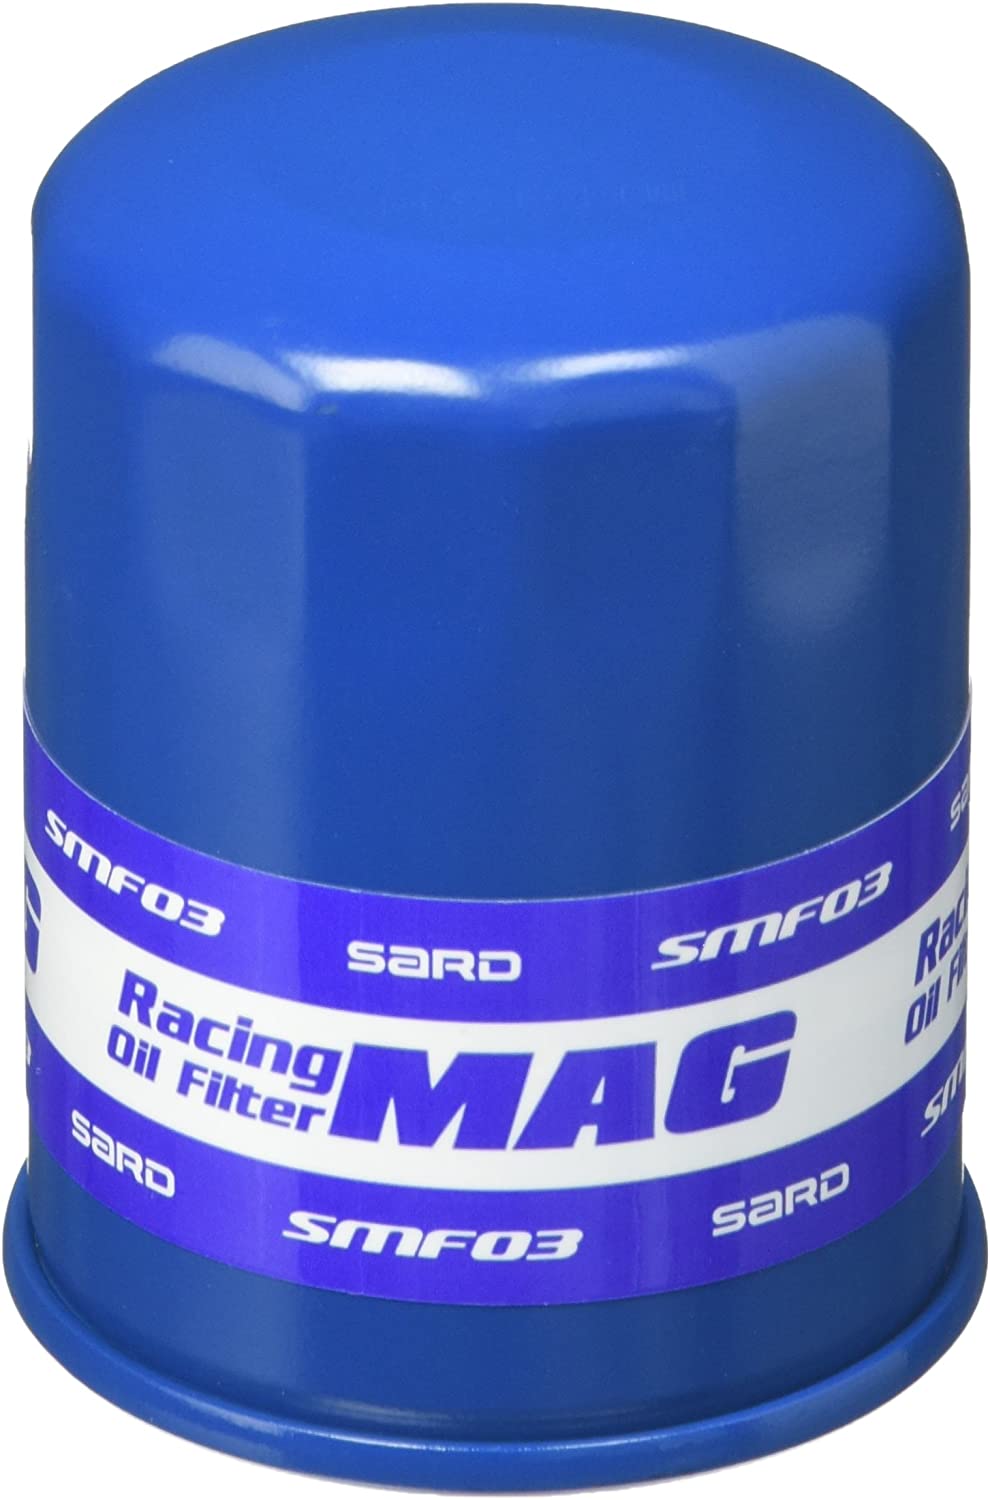 SARD RACING OIL FILTER For CEDRIC GLORIA HY33 HBY33 MY33 SMF01